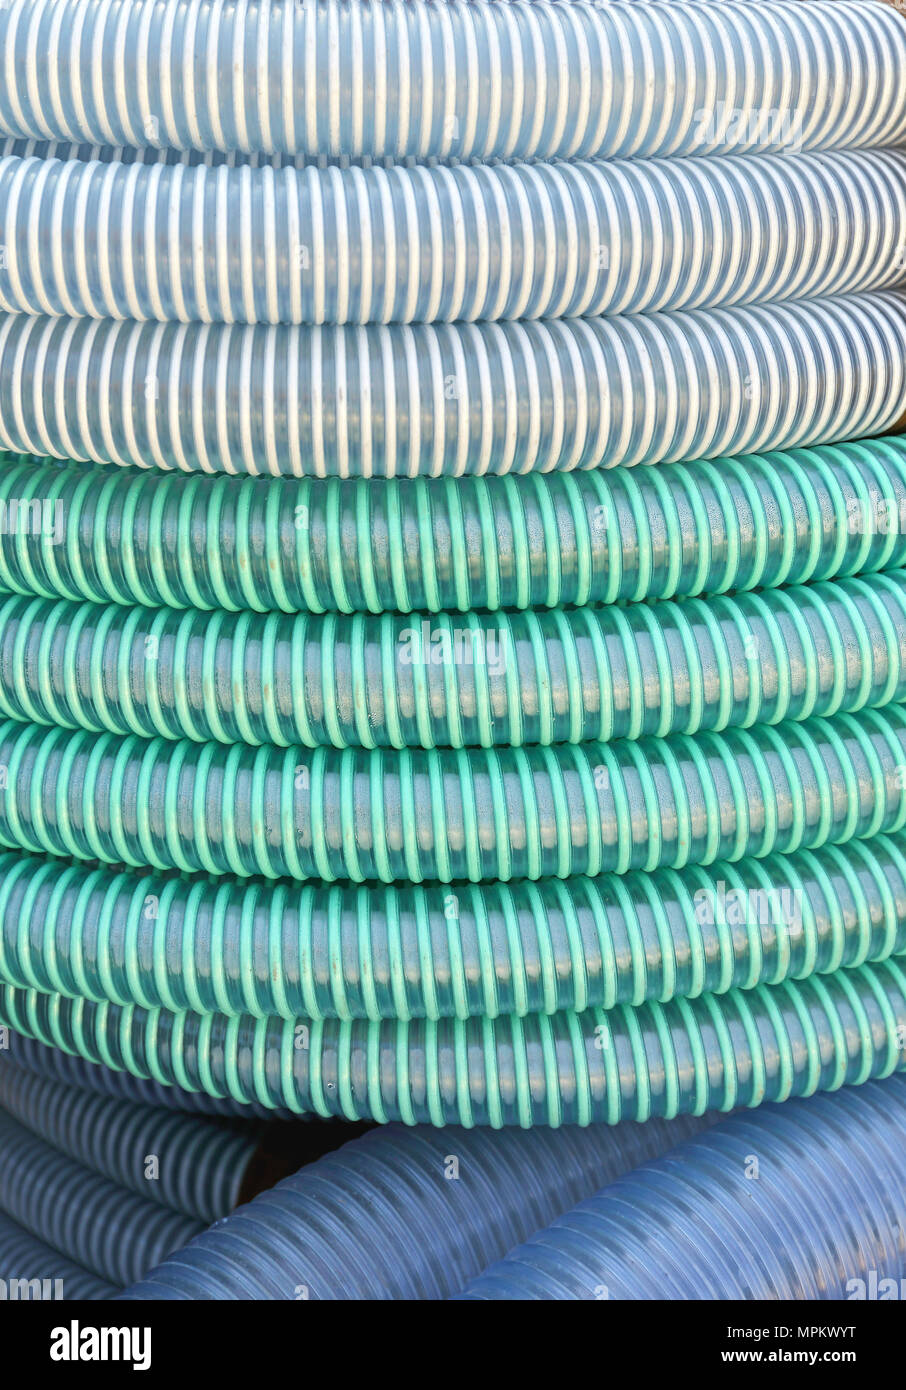 Flexible Plastic Pipes and Hoses in Coils Stock Photo